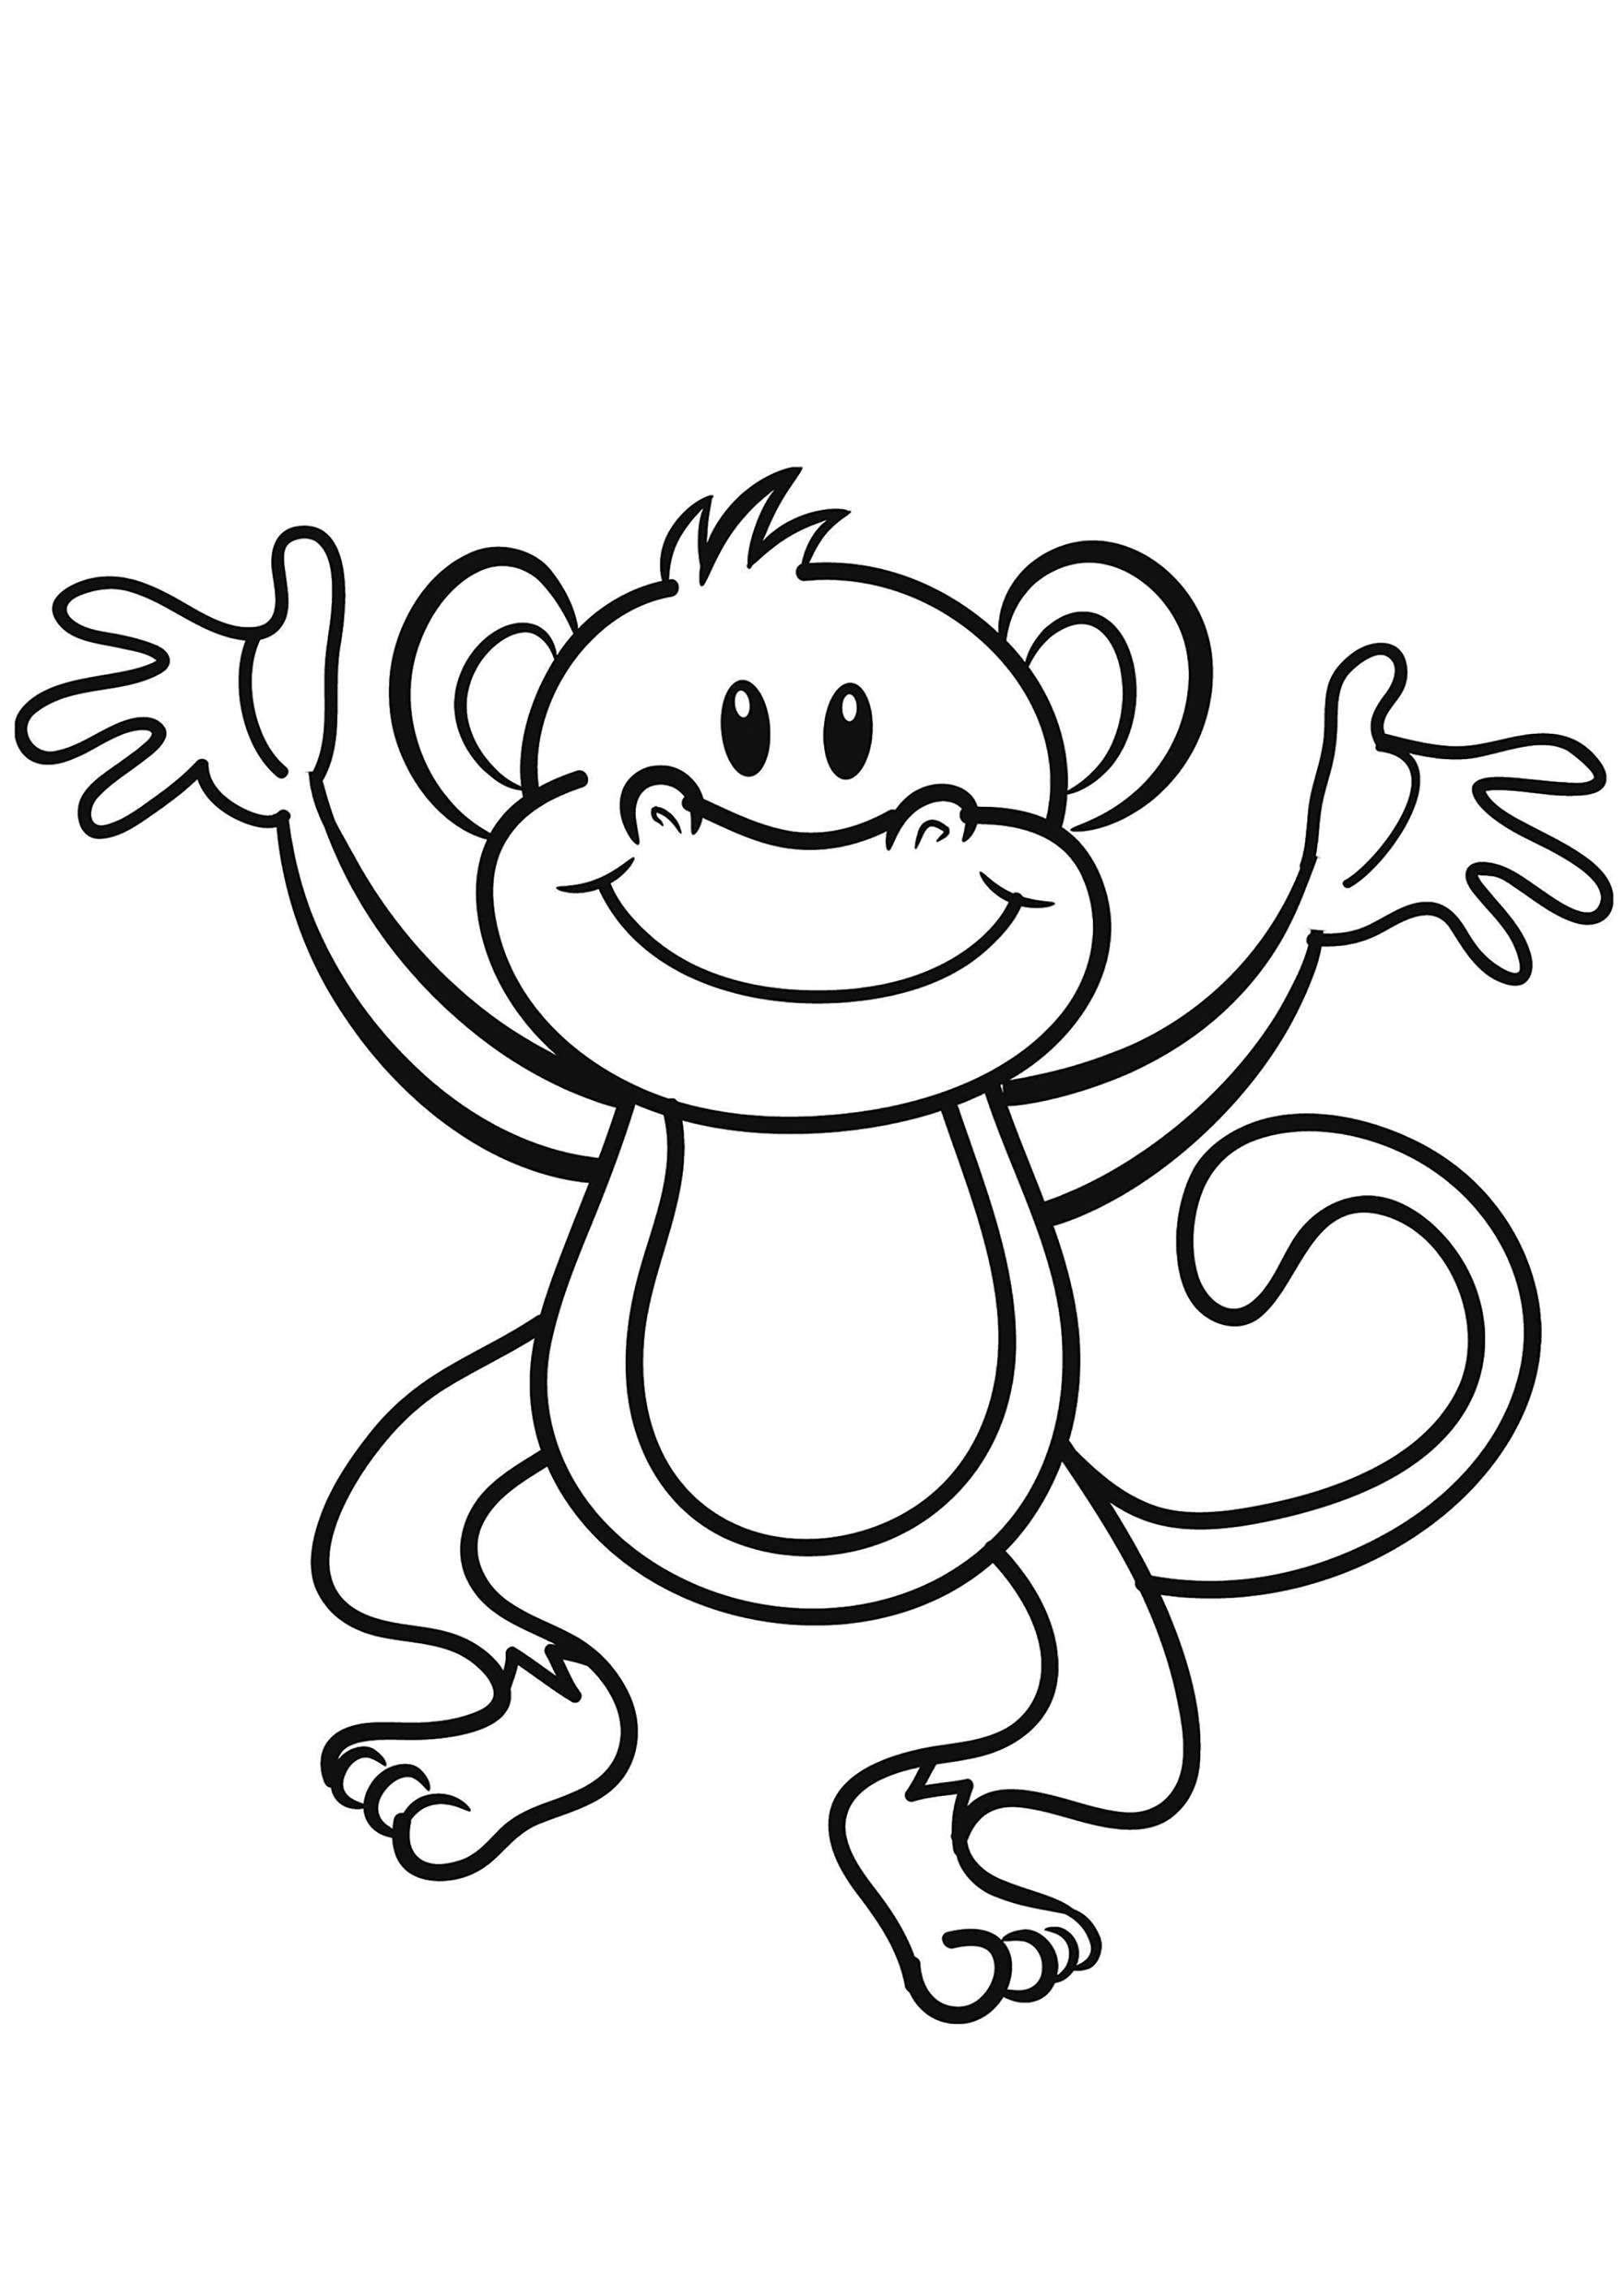 Monkey Mask Coloring Page